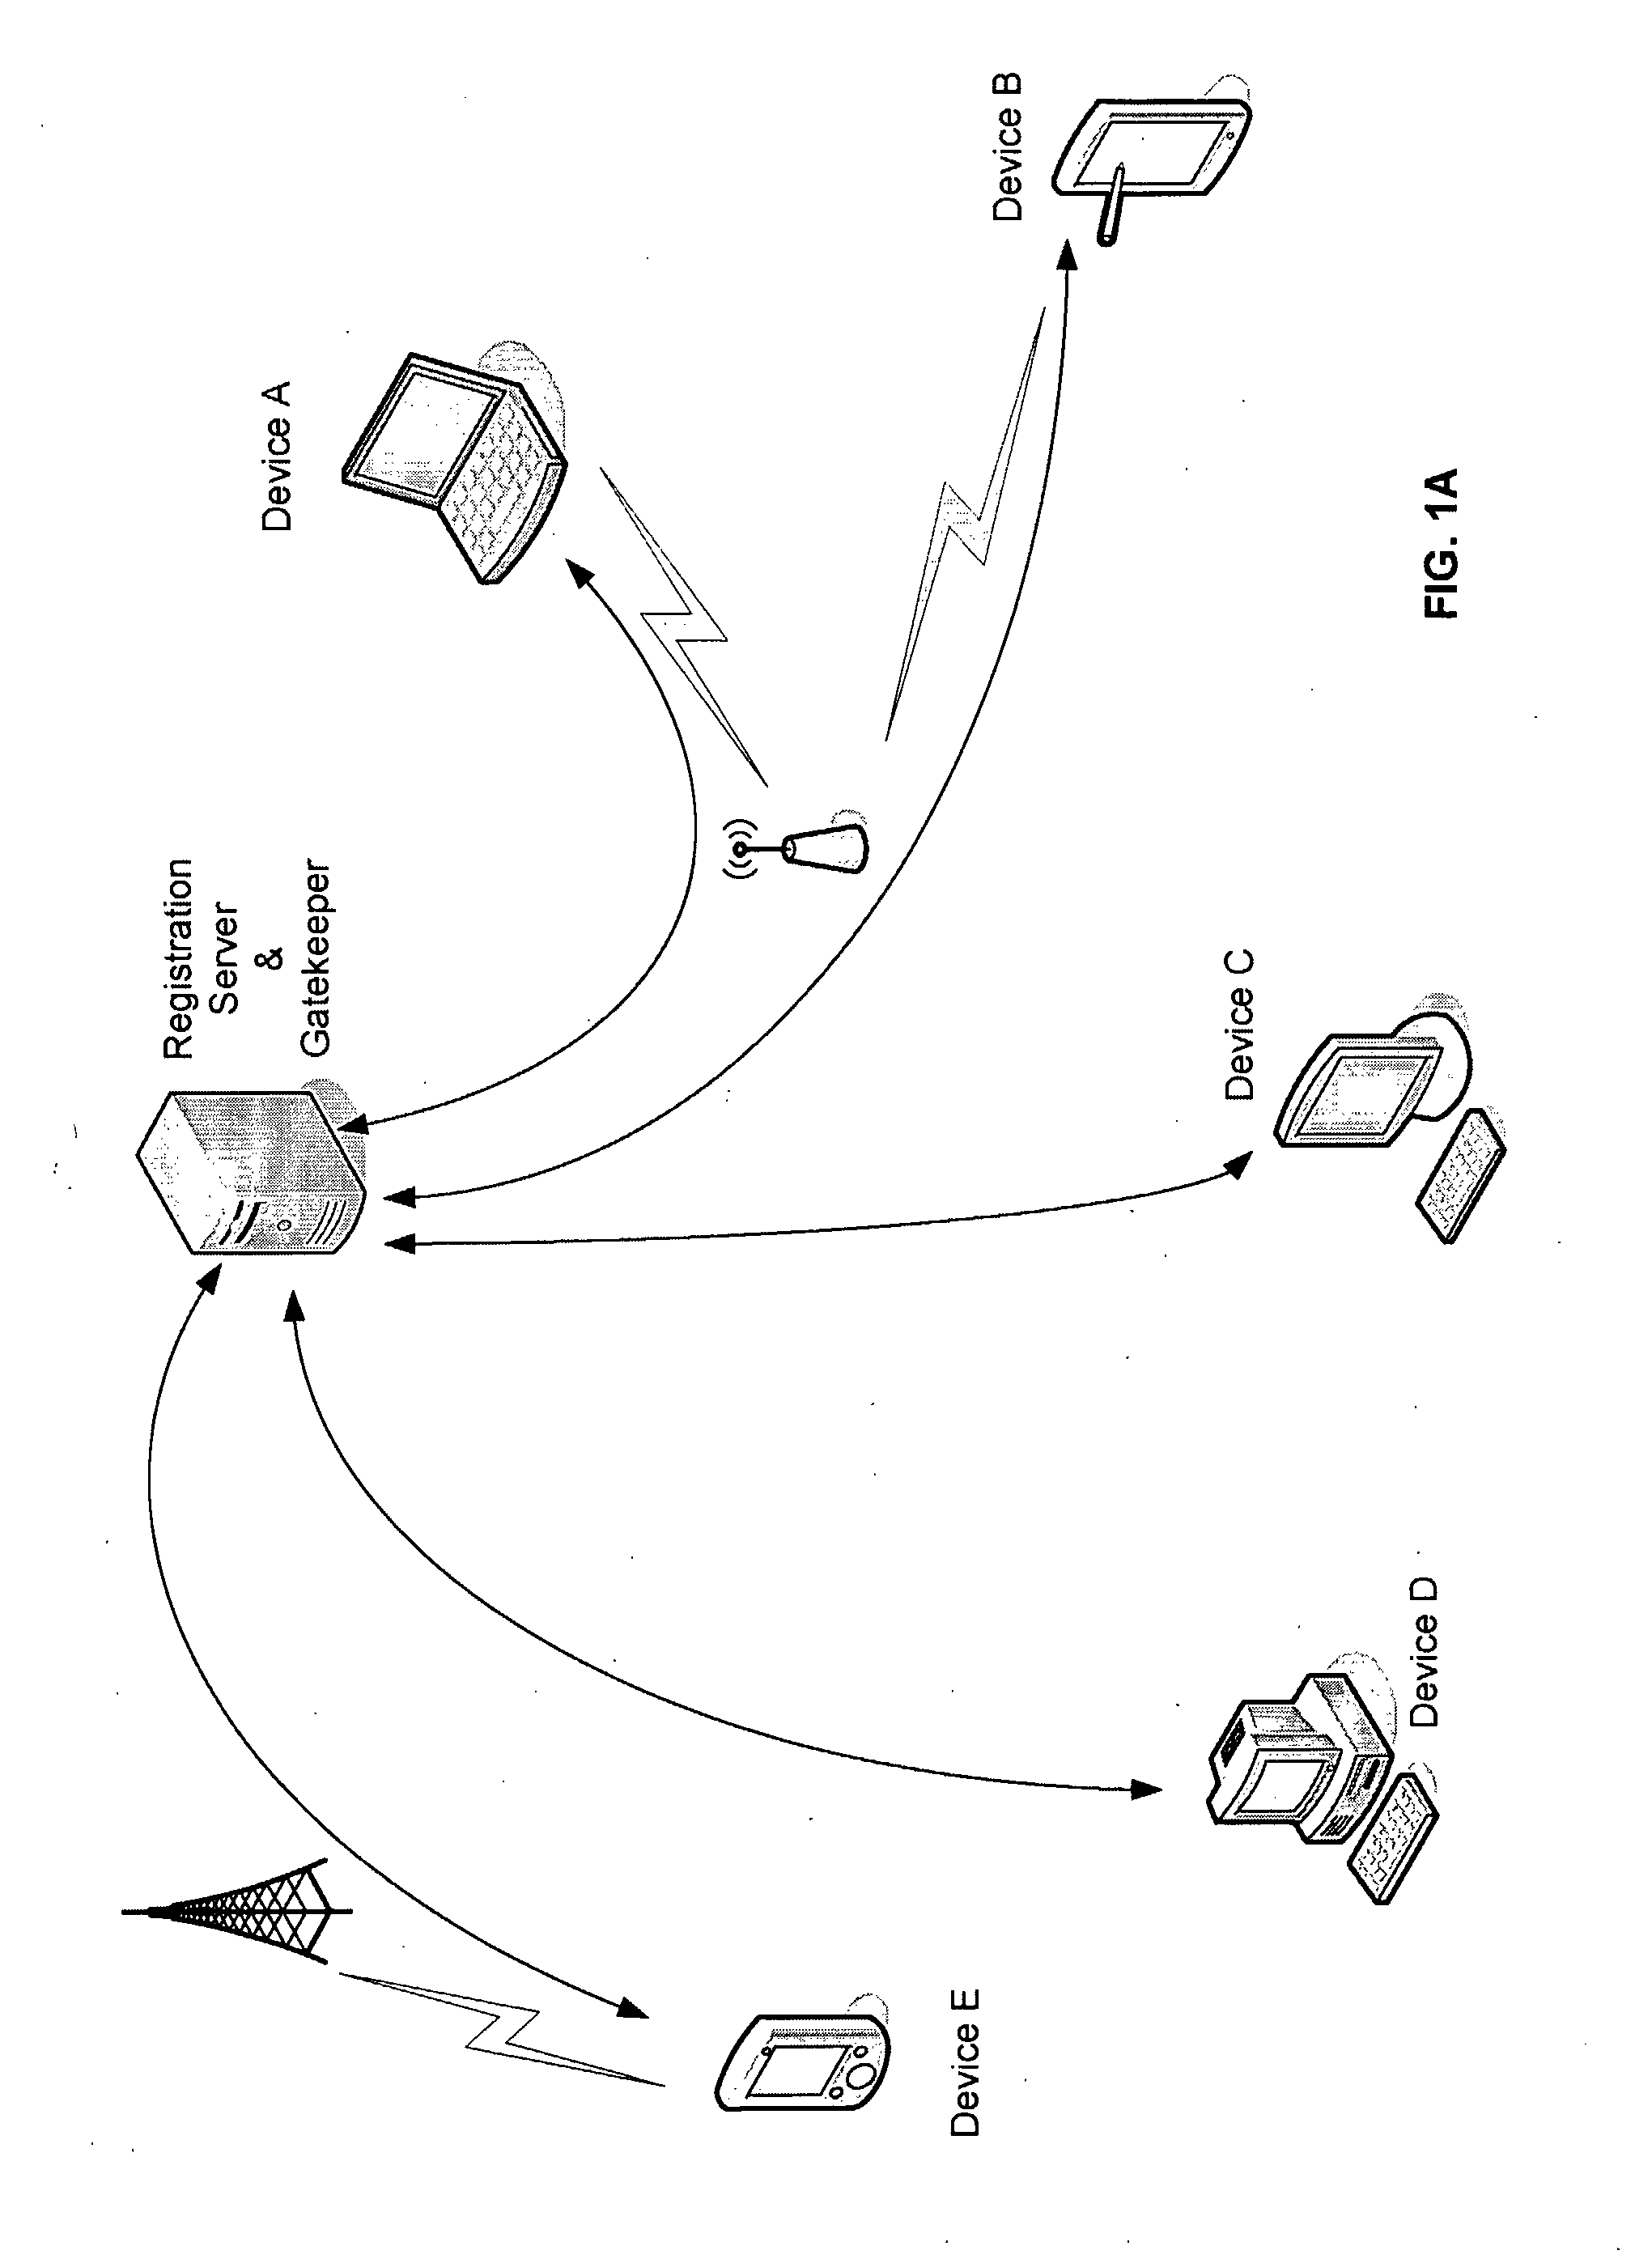 System and Method for the Synchronization of Data Across Multiple Computing Devices